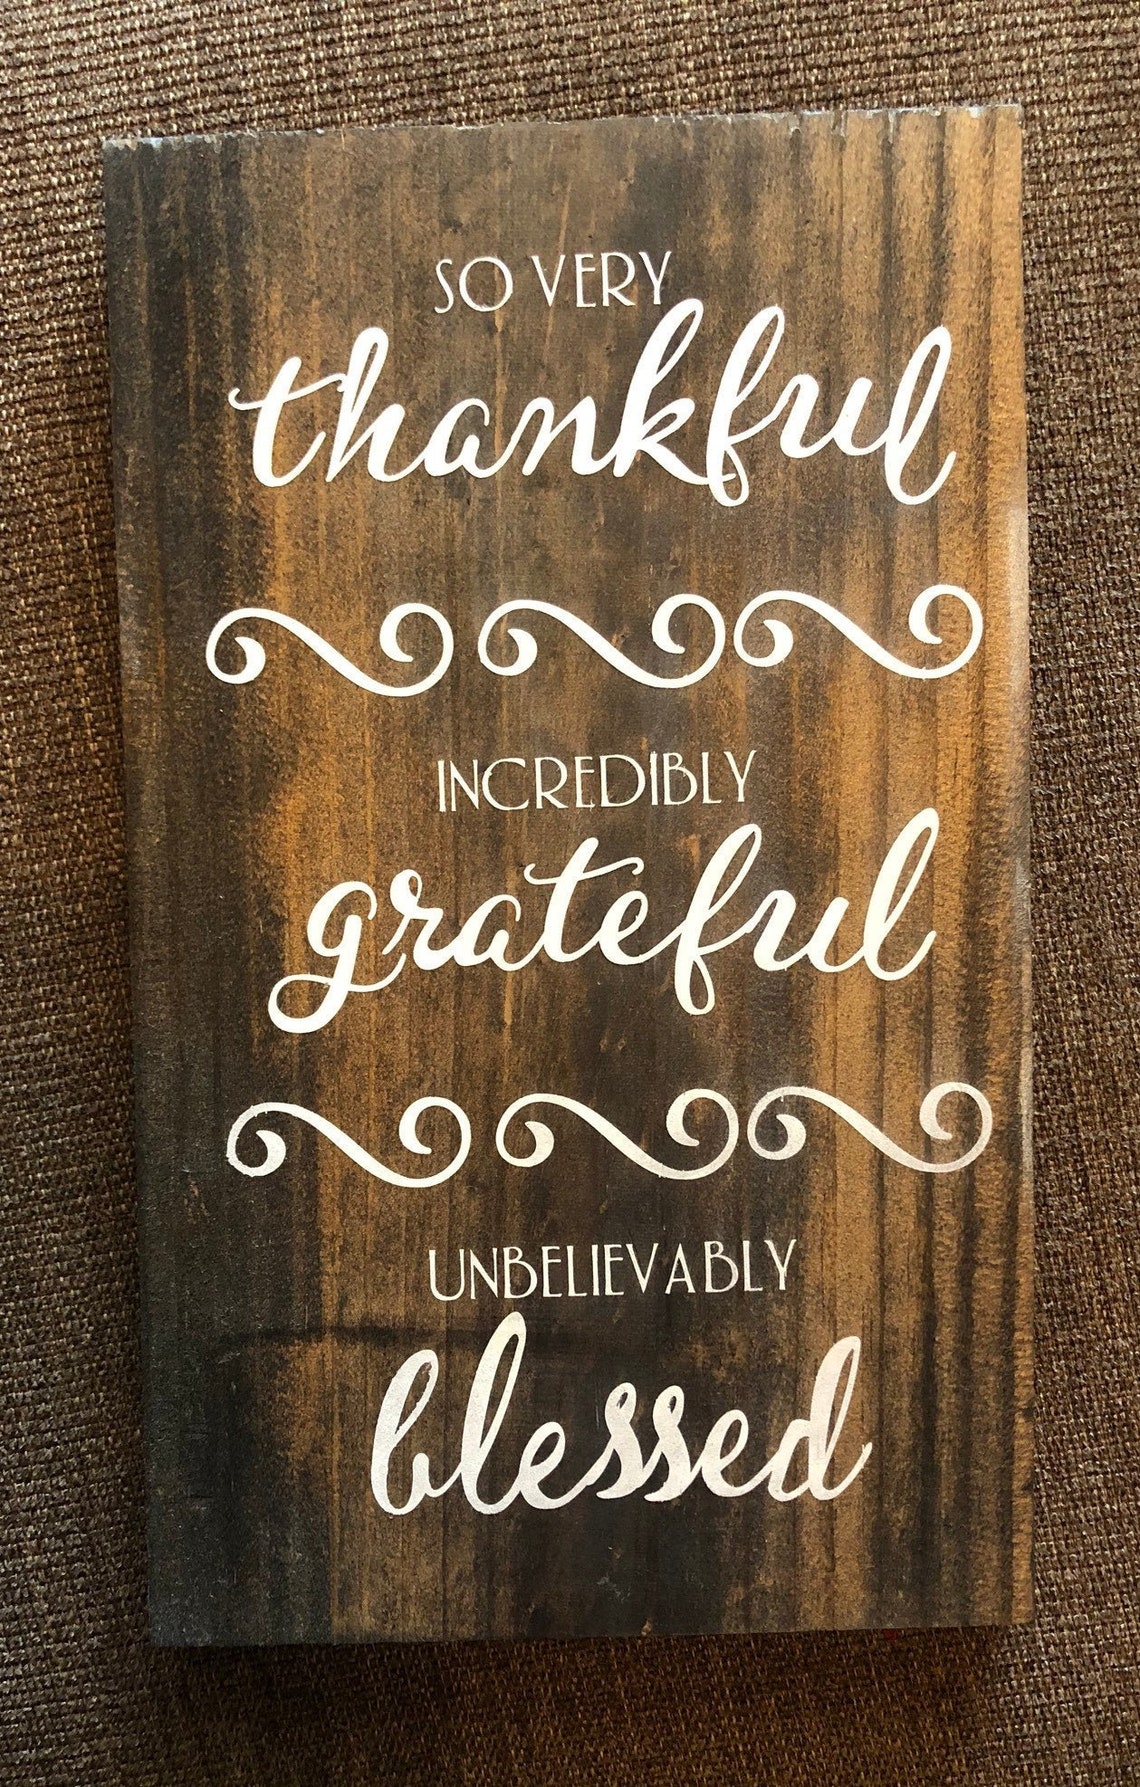 Grateful Thankful Blessed Wooden sign decor | Etsy